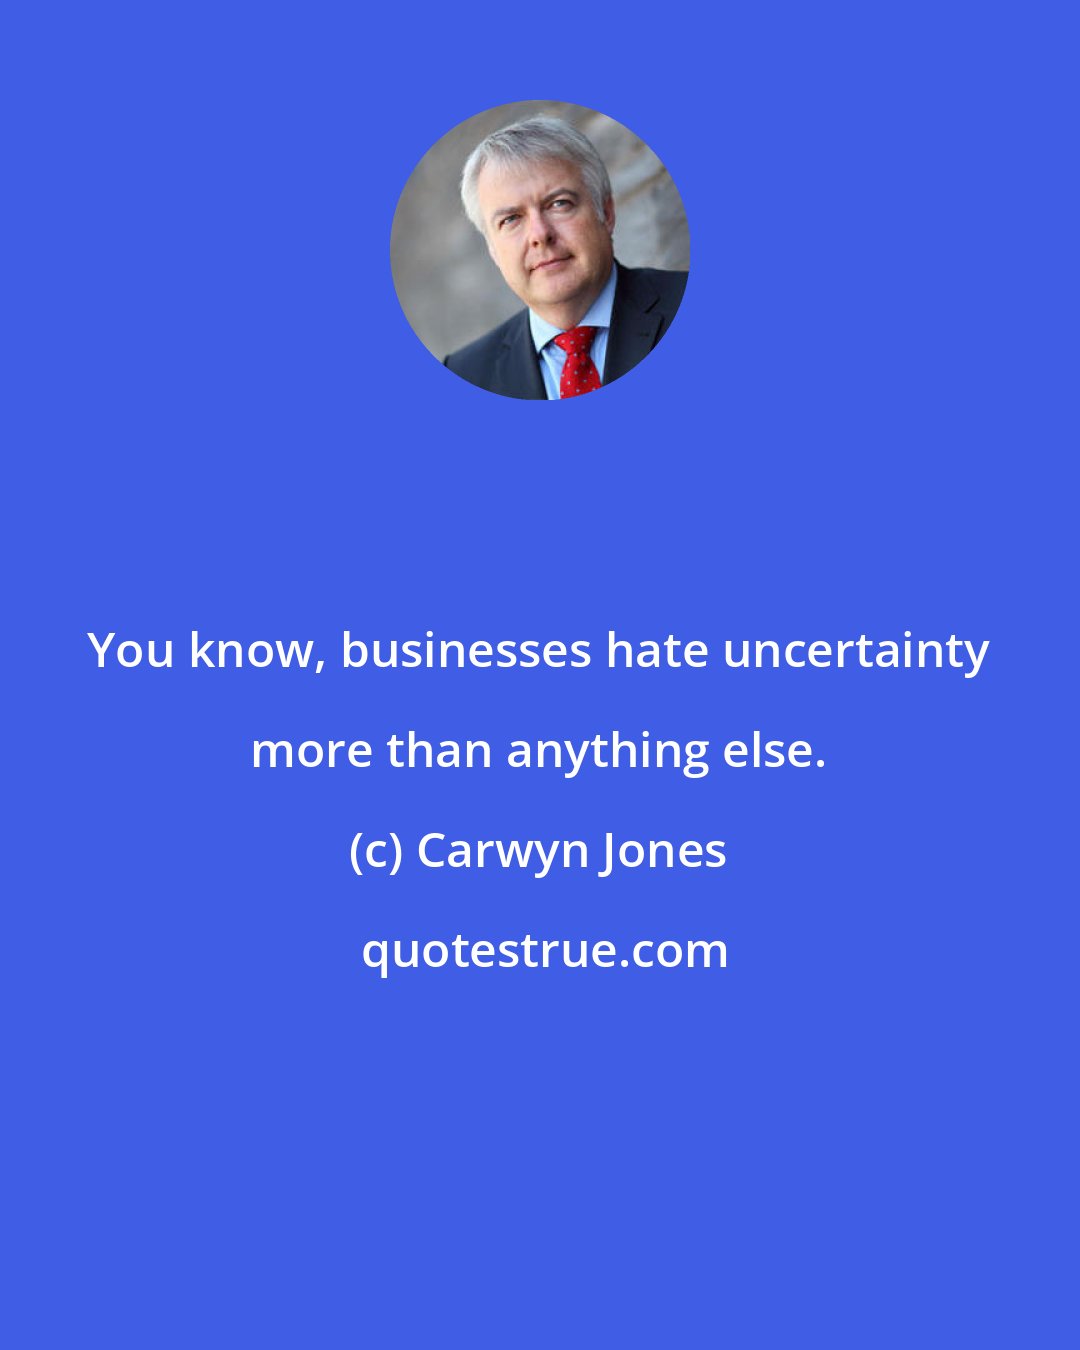 Carwyn Jones: You know, businesses hate uncertainty more than anything else.